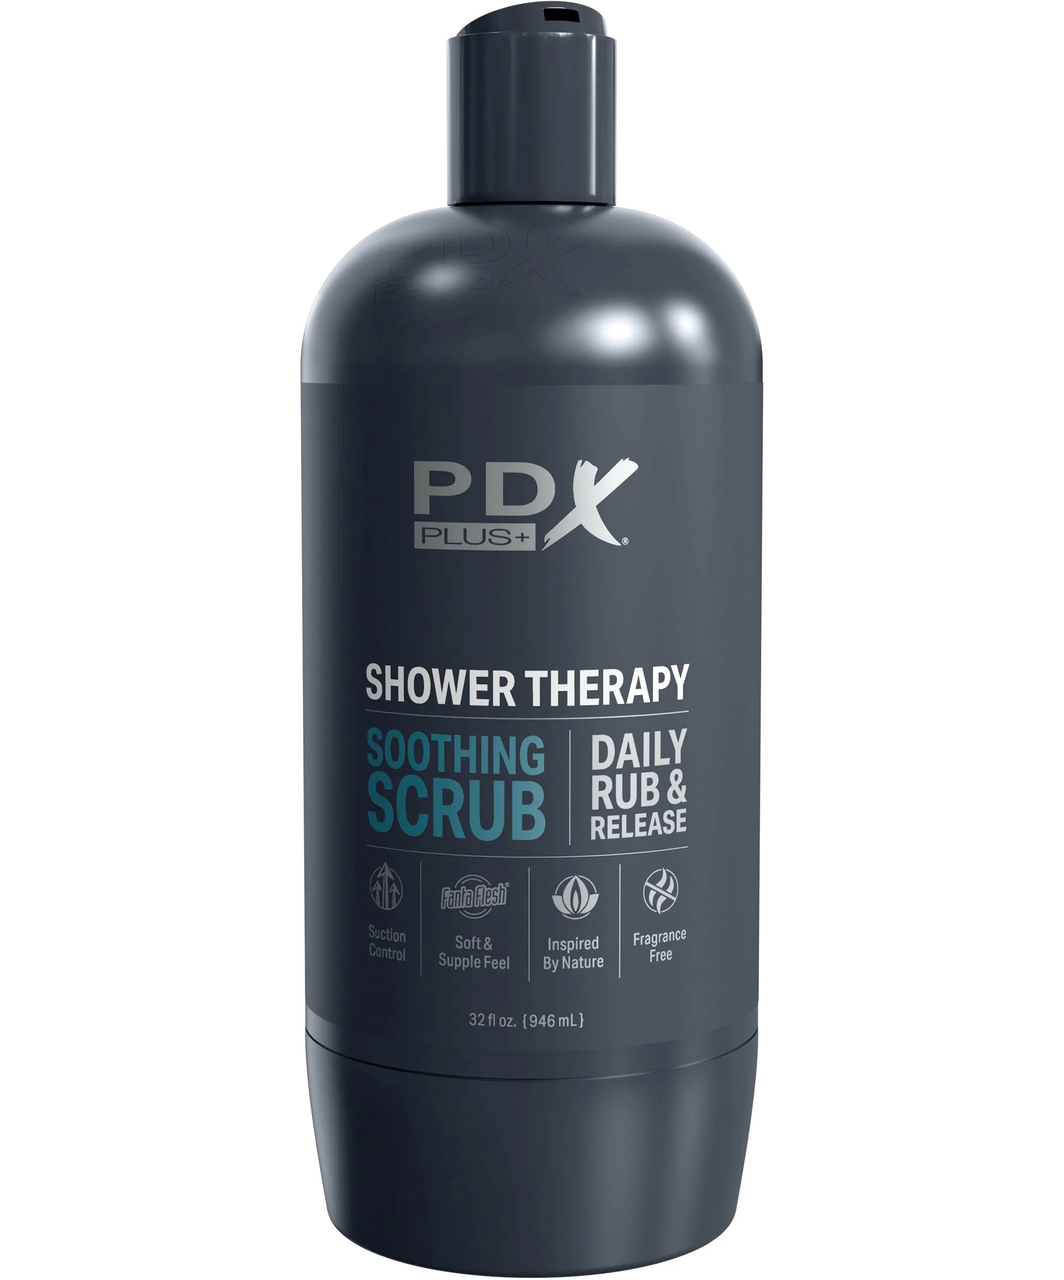 Pipedream PDX Plus Soothing Scrub Shower Therapy Stroker